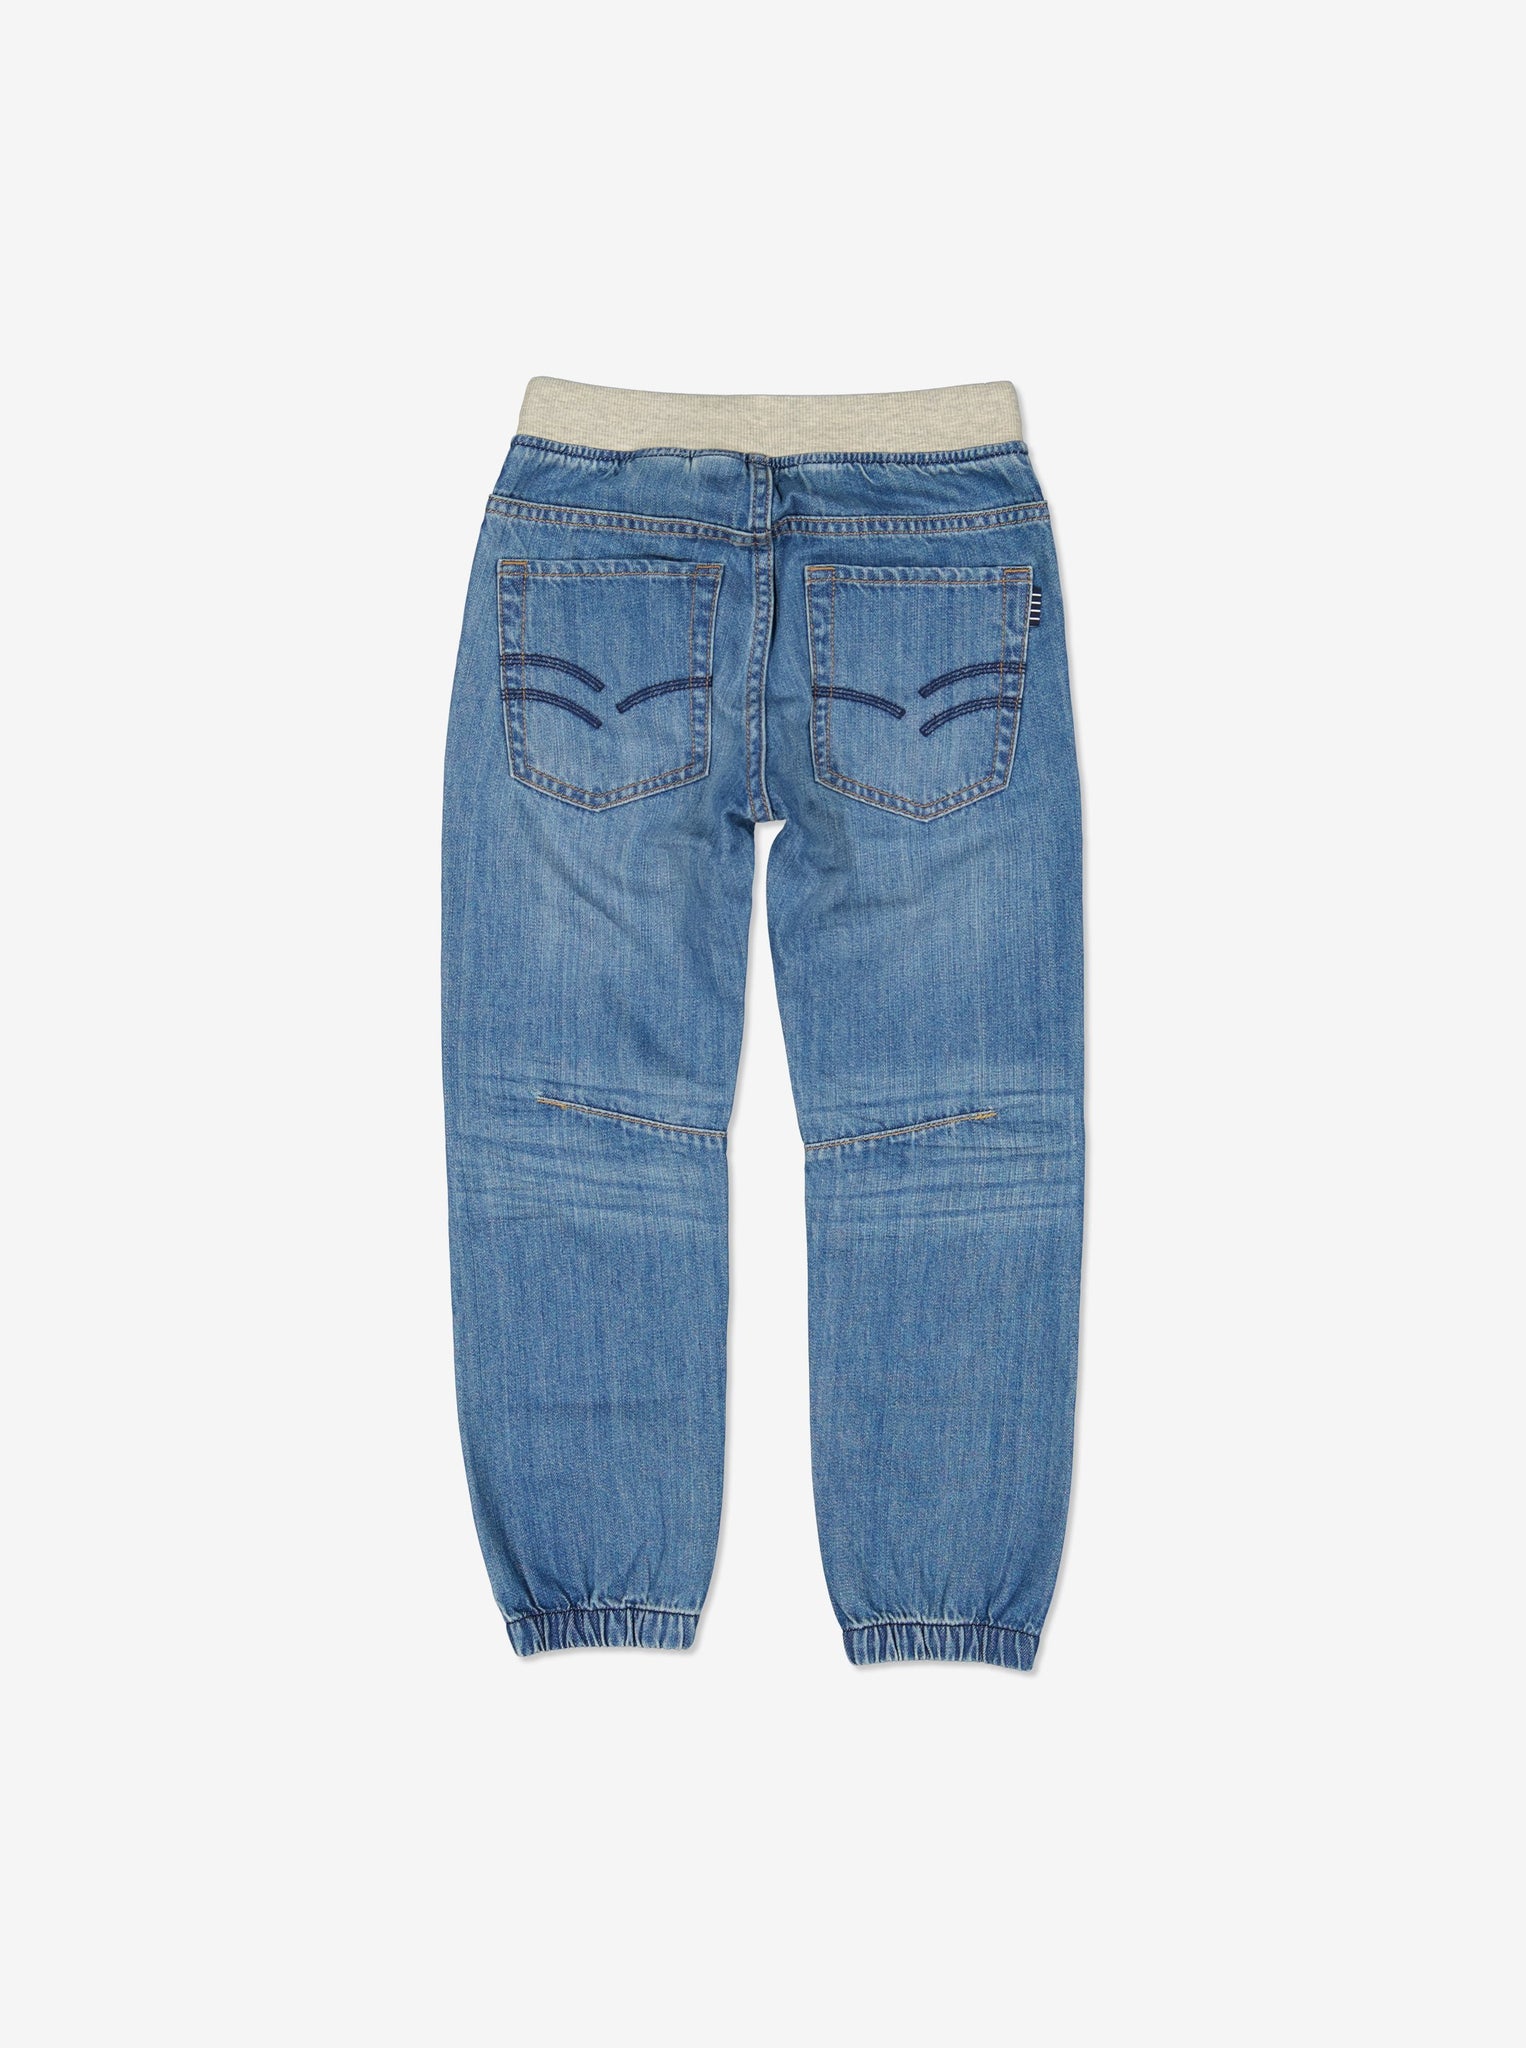  Organic Loose Fit Kids Light Jeans from Polarn O. Pyret Kidswear. Made with 100% organic cotton.